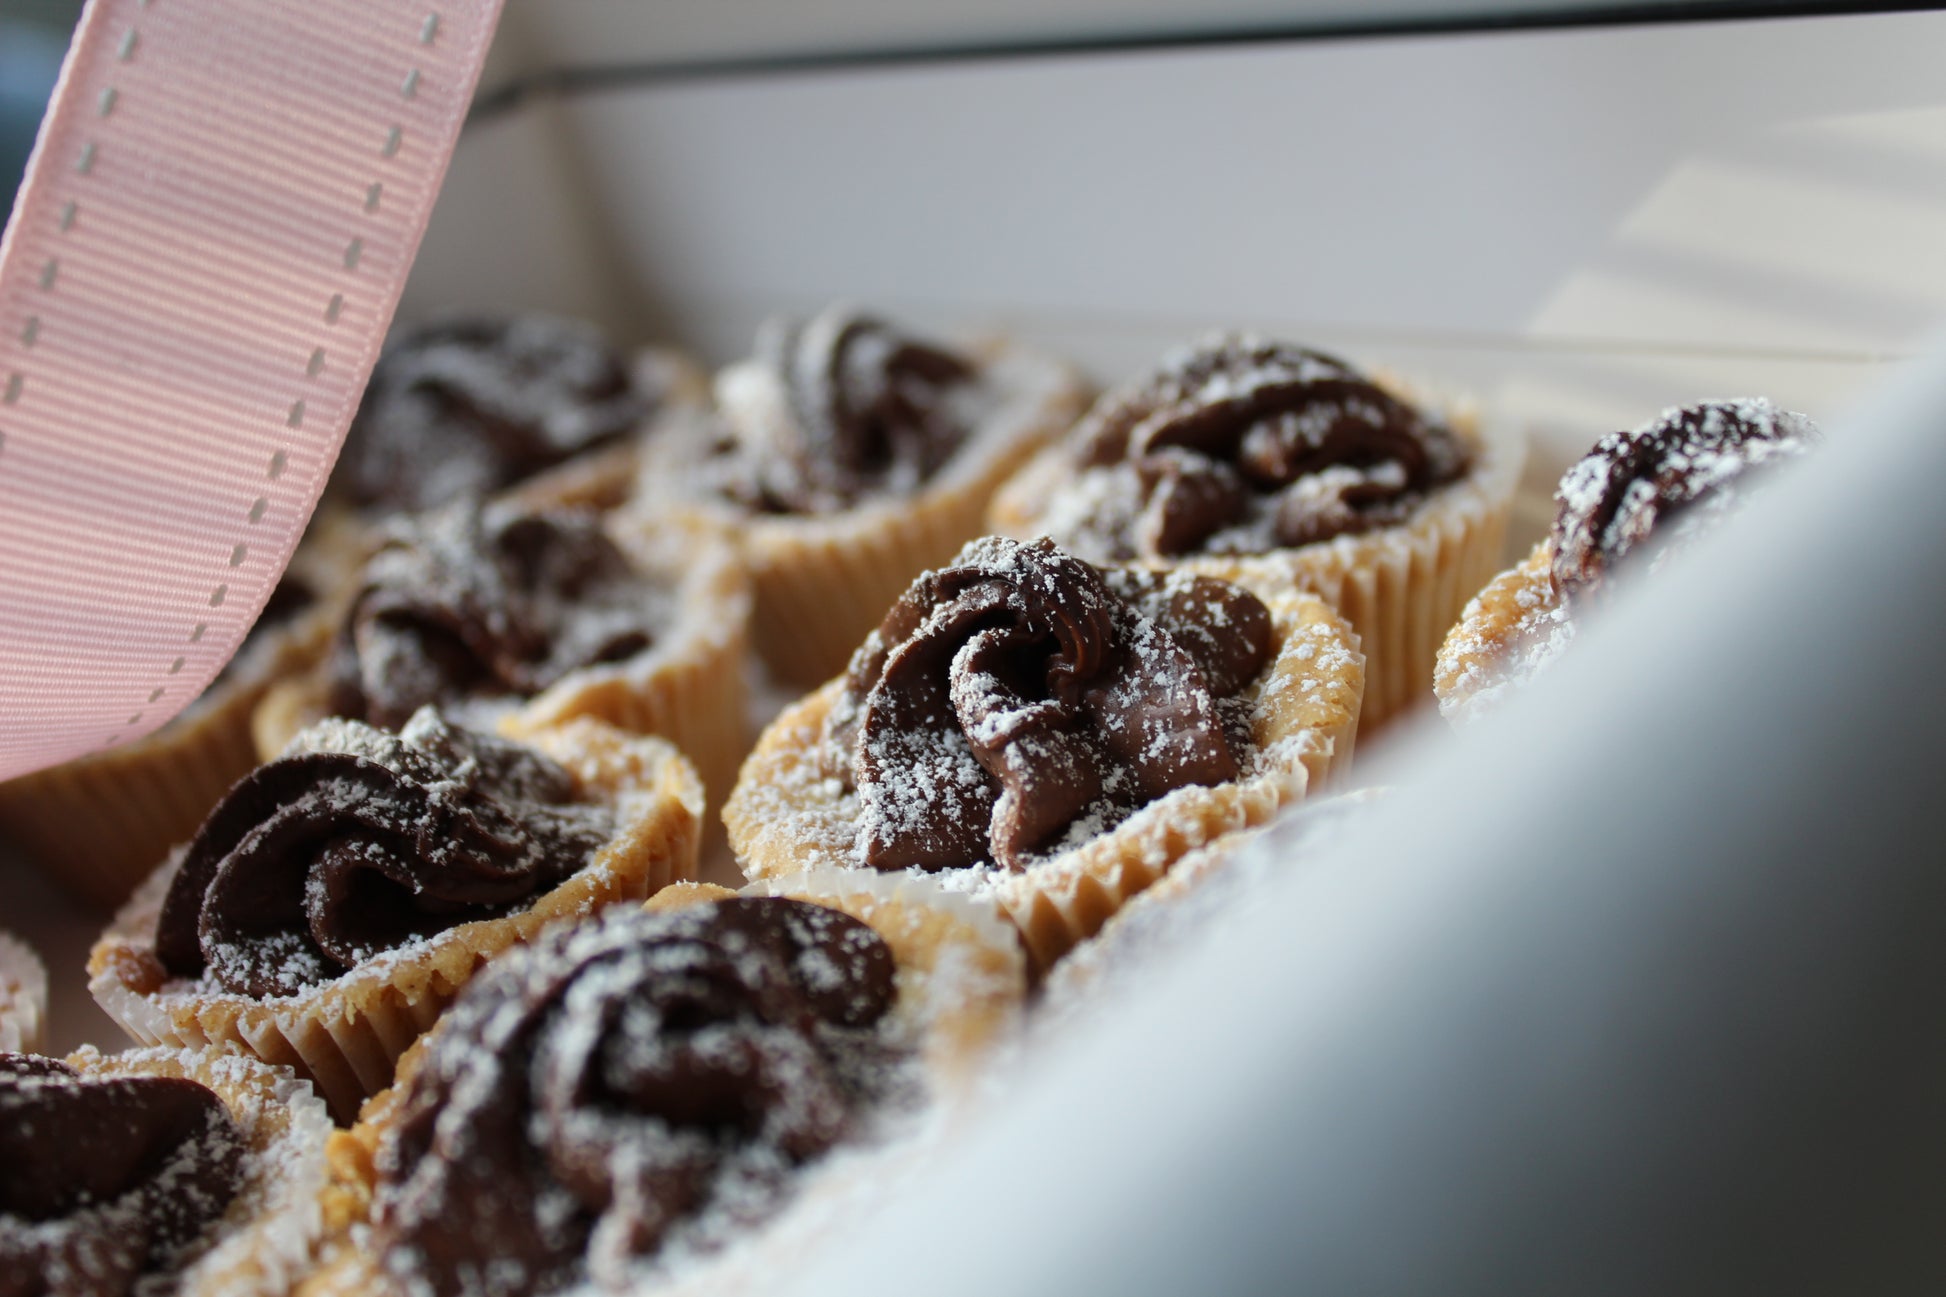 Chocolate Gluten Free Pastry Minis - 4 Piece Gift Box - softly textured buttery gluten free dough surrounding a dollop of chocolate ganache filling